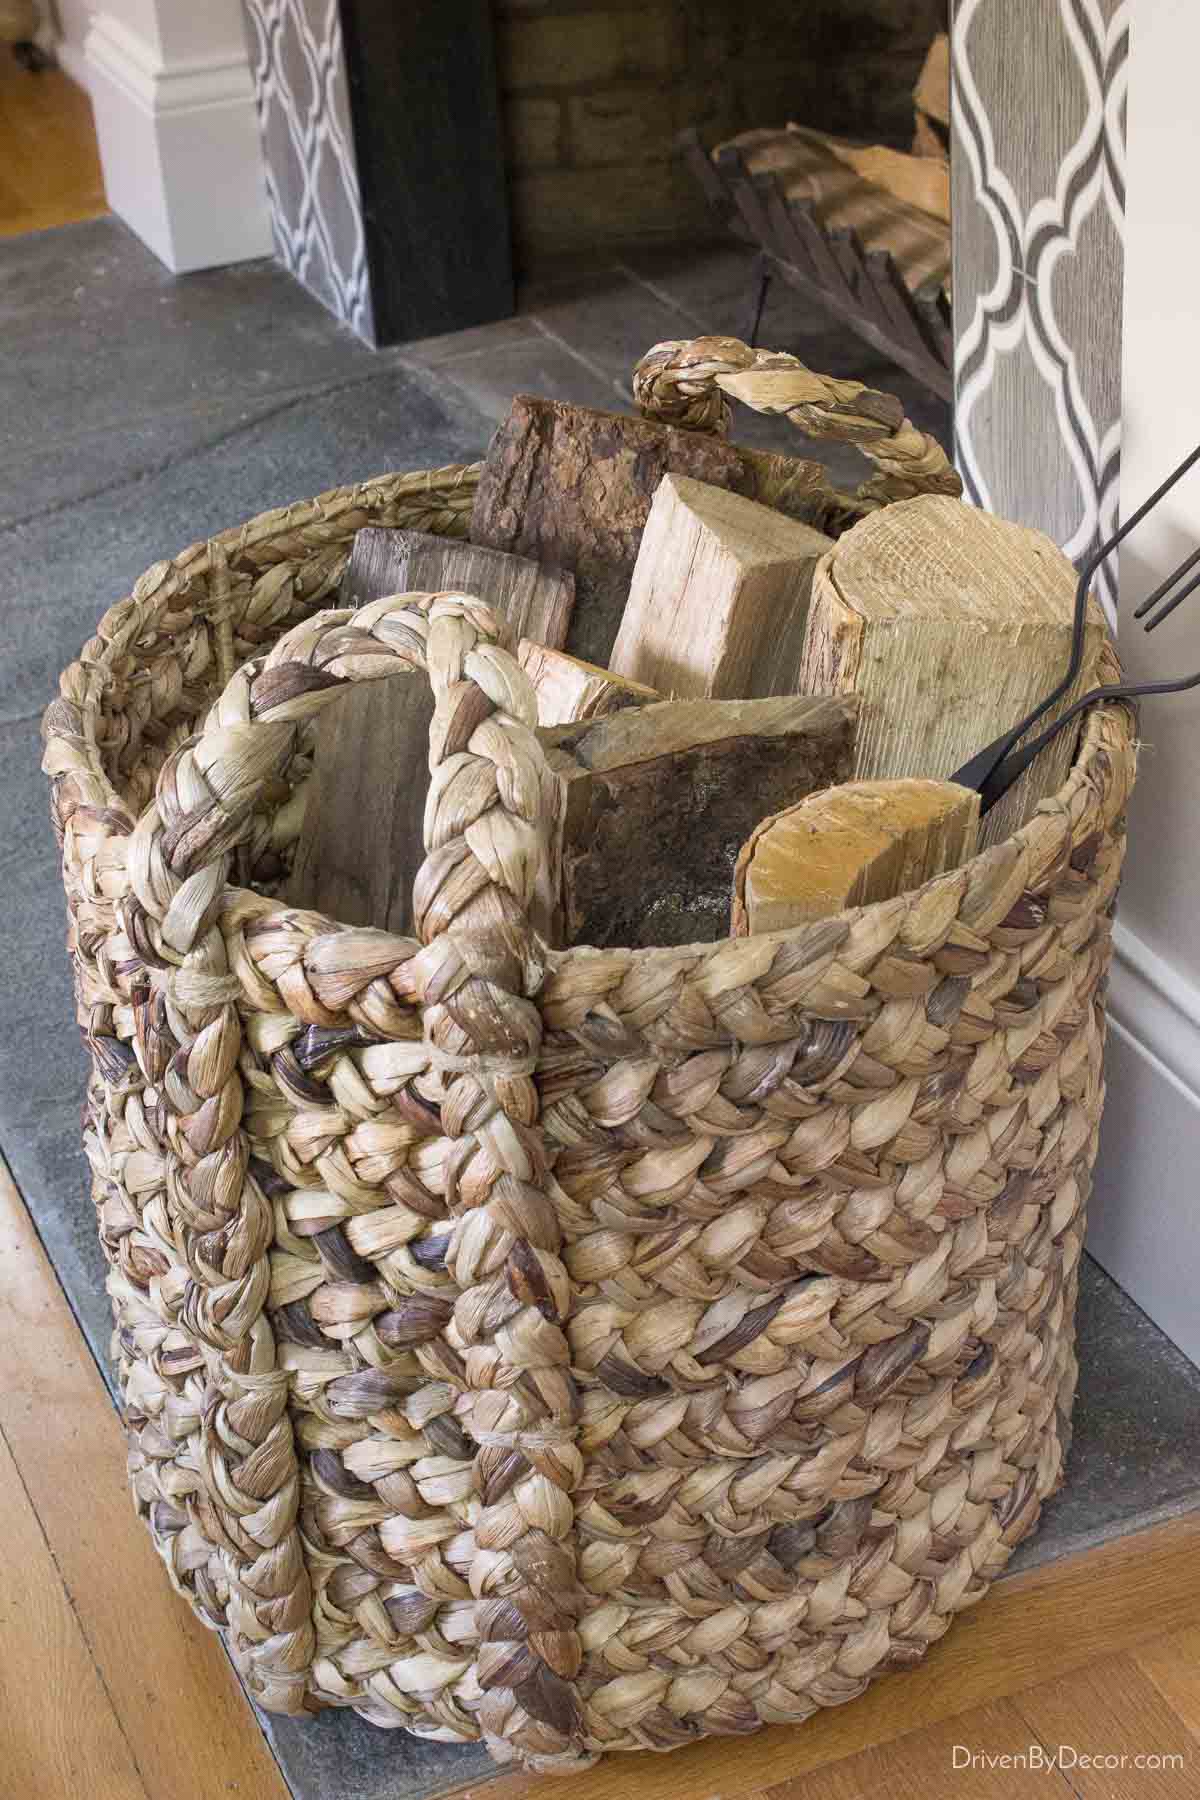 Woven basket with firewood